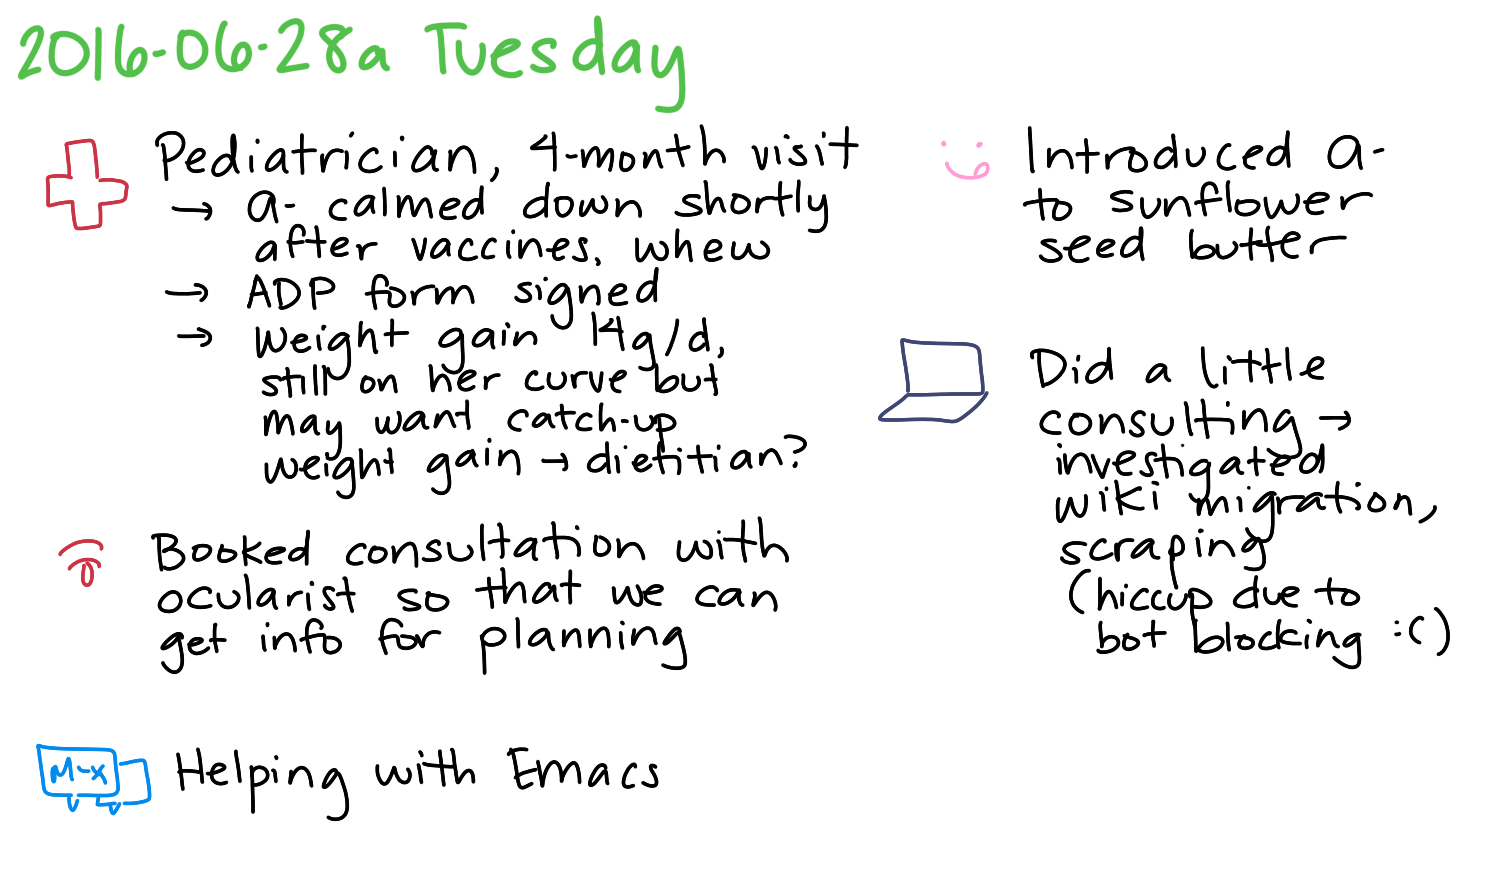 2016-06-28a Tuesday -- index card #journal.png